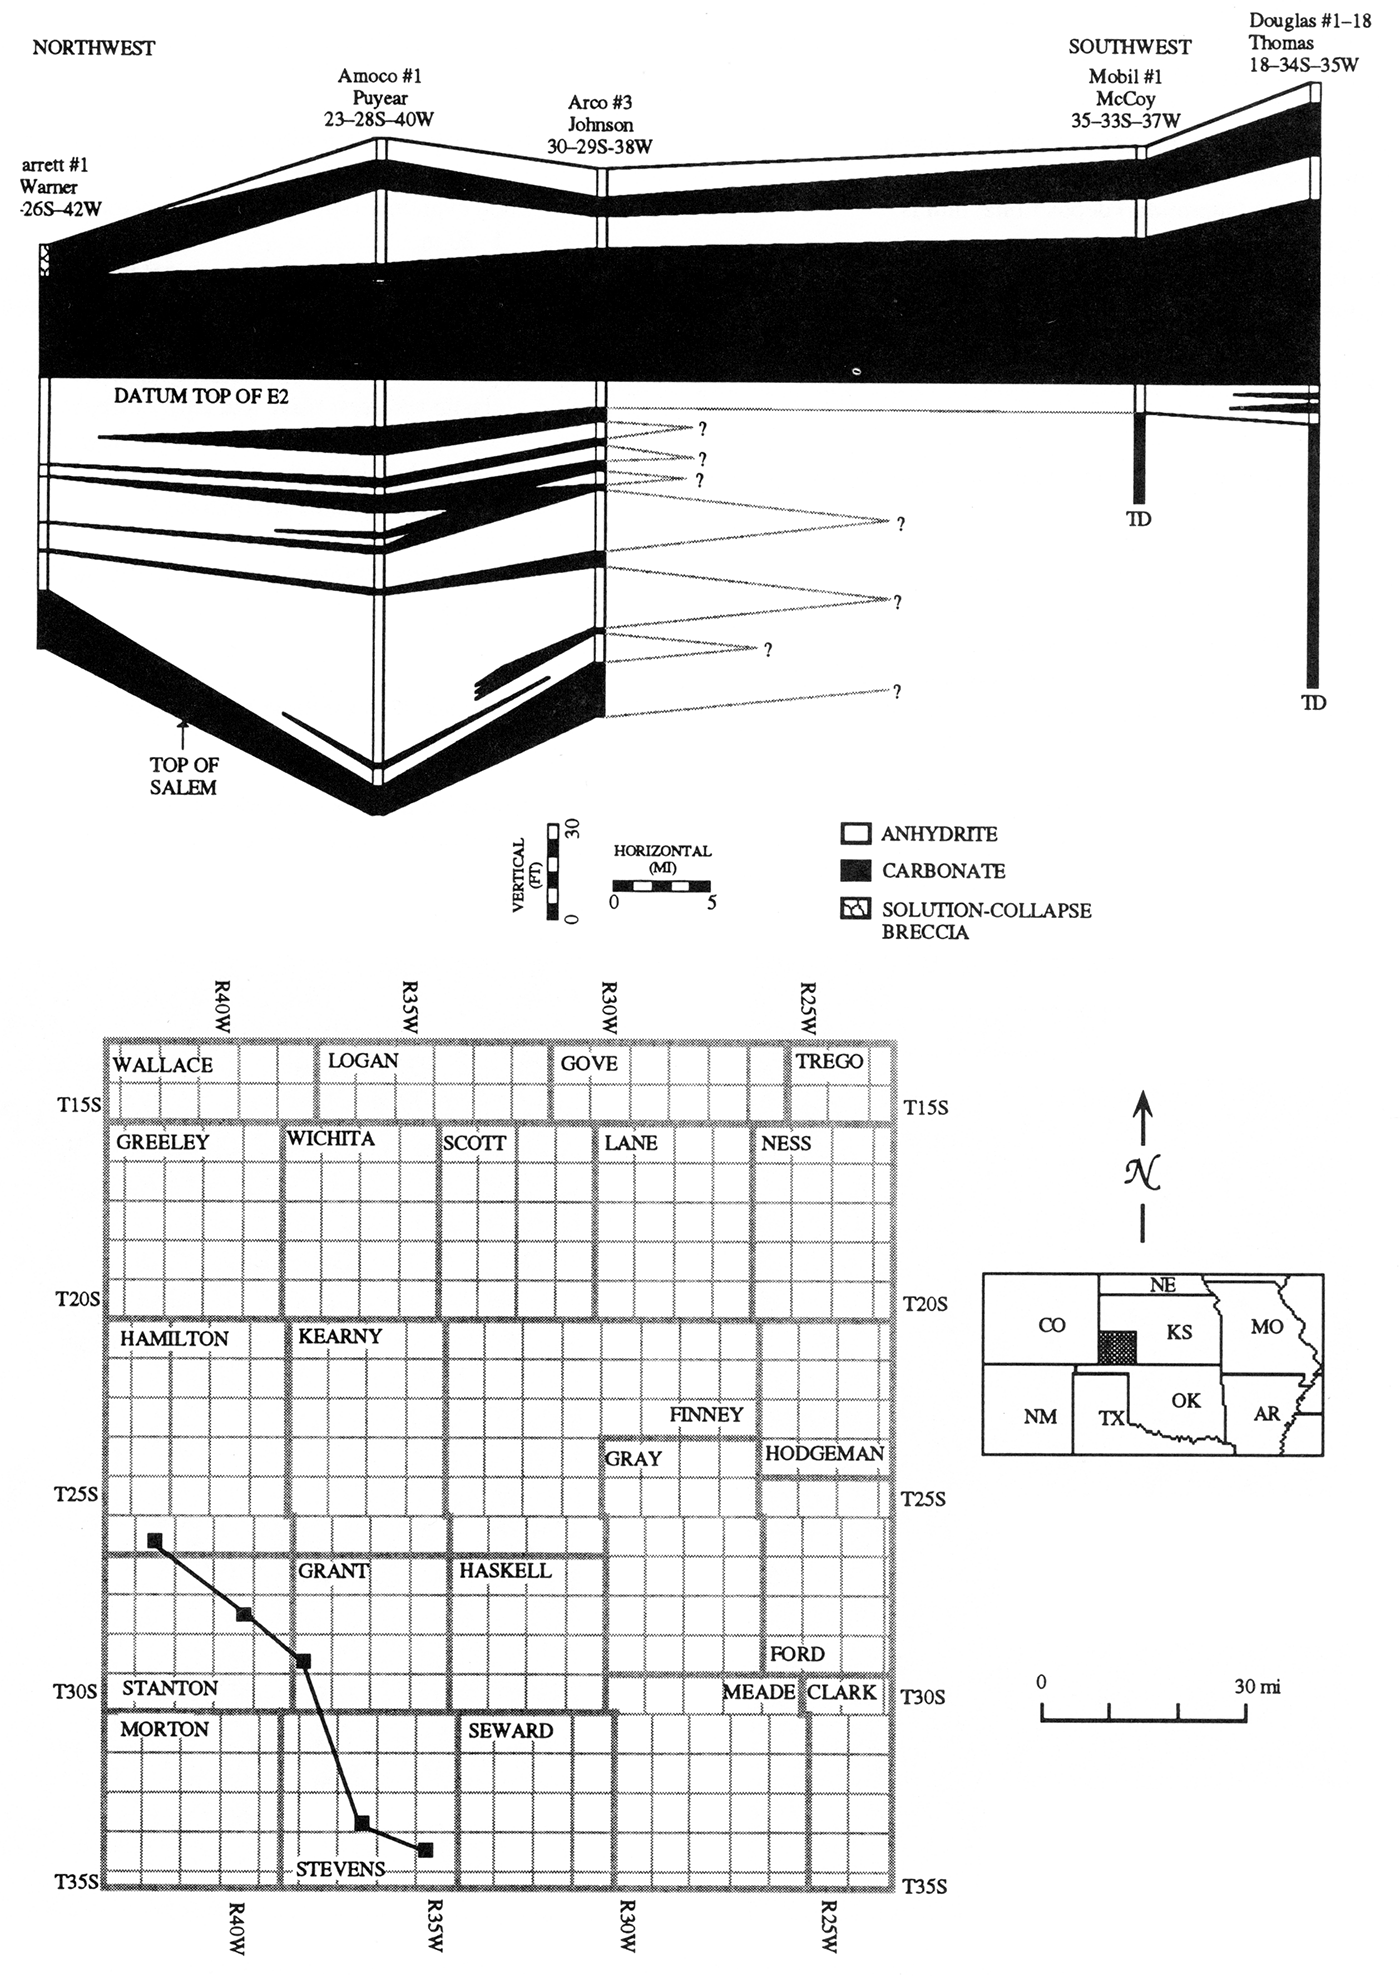 North-south stratigraphic cross section of the Hugoton Member anhydrite.